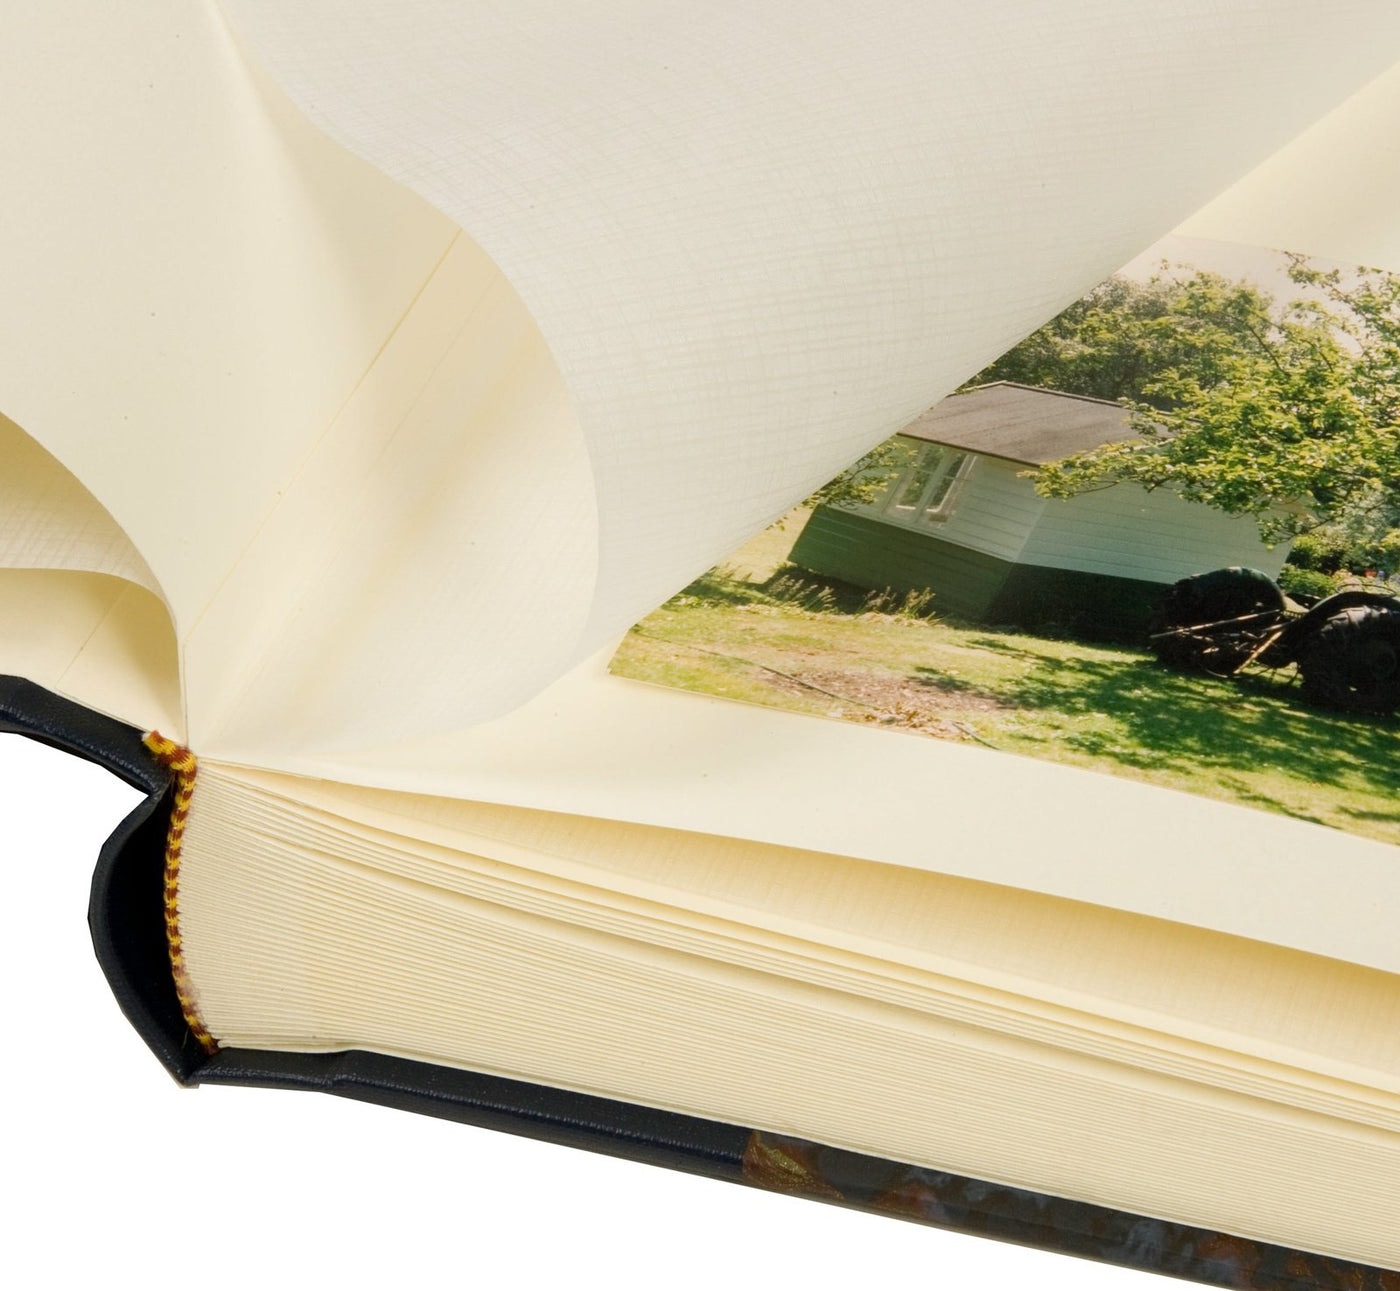 Interleaved pages of the Locketts Large Square Traditional Photo Album